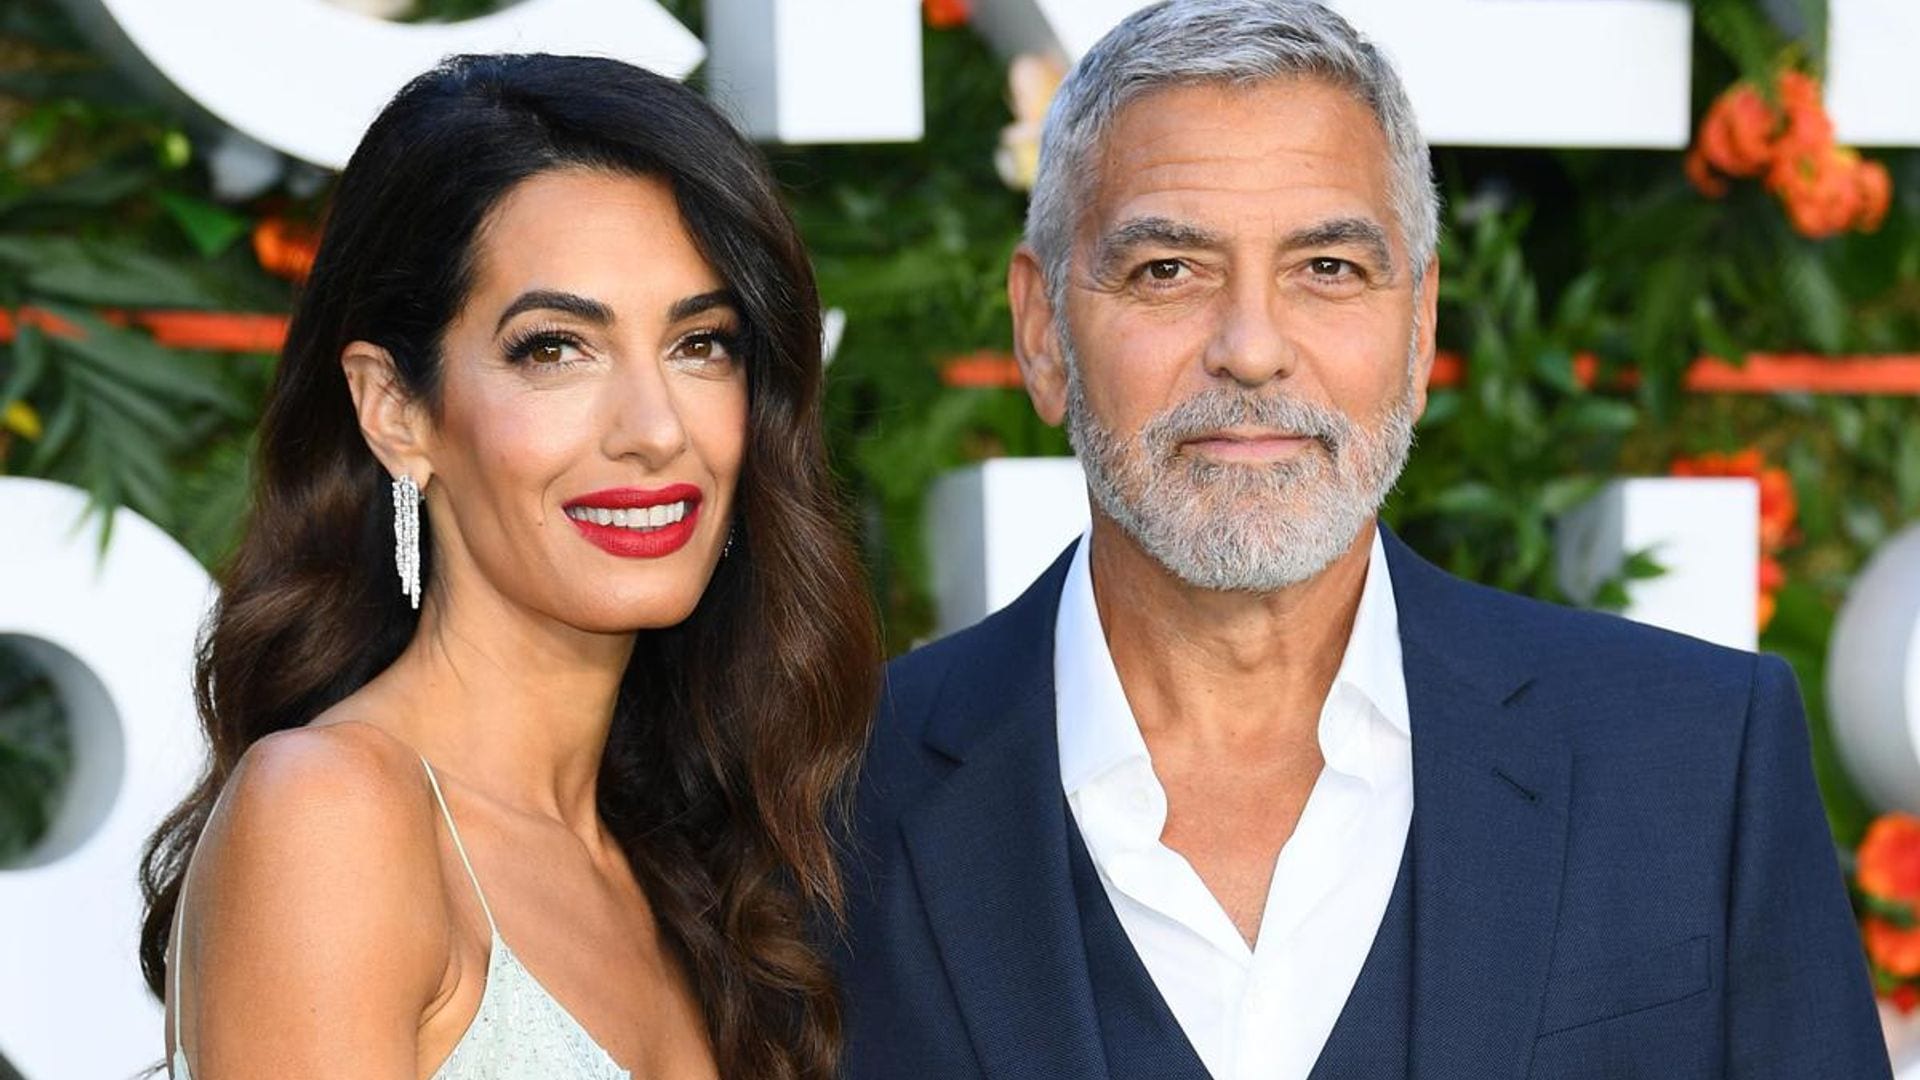 Amal Clooney looks elegant and ready to party in yellow minidress for her husband’s afterparty